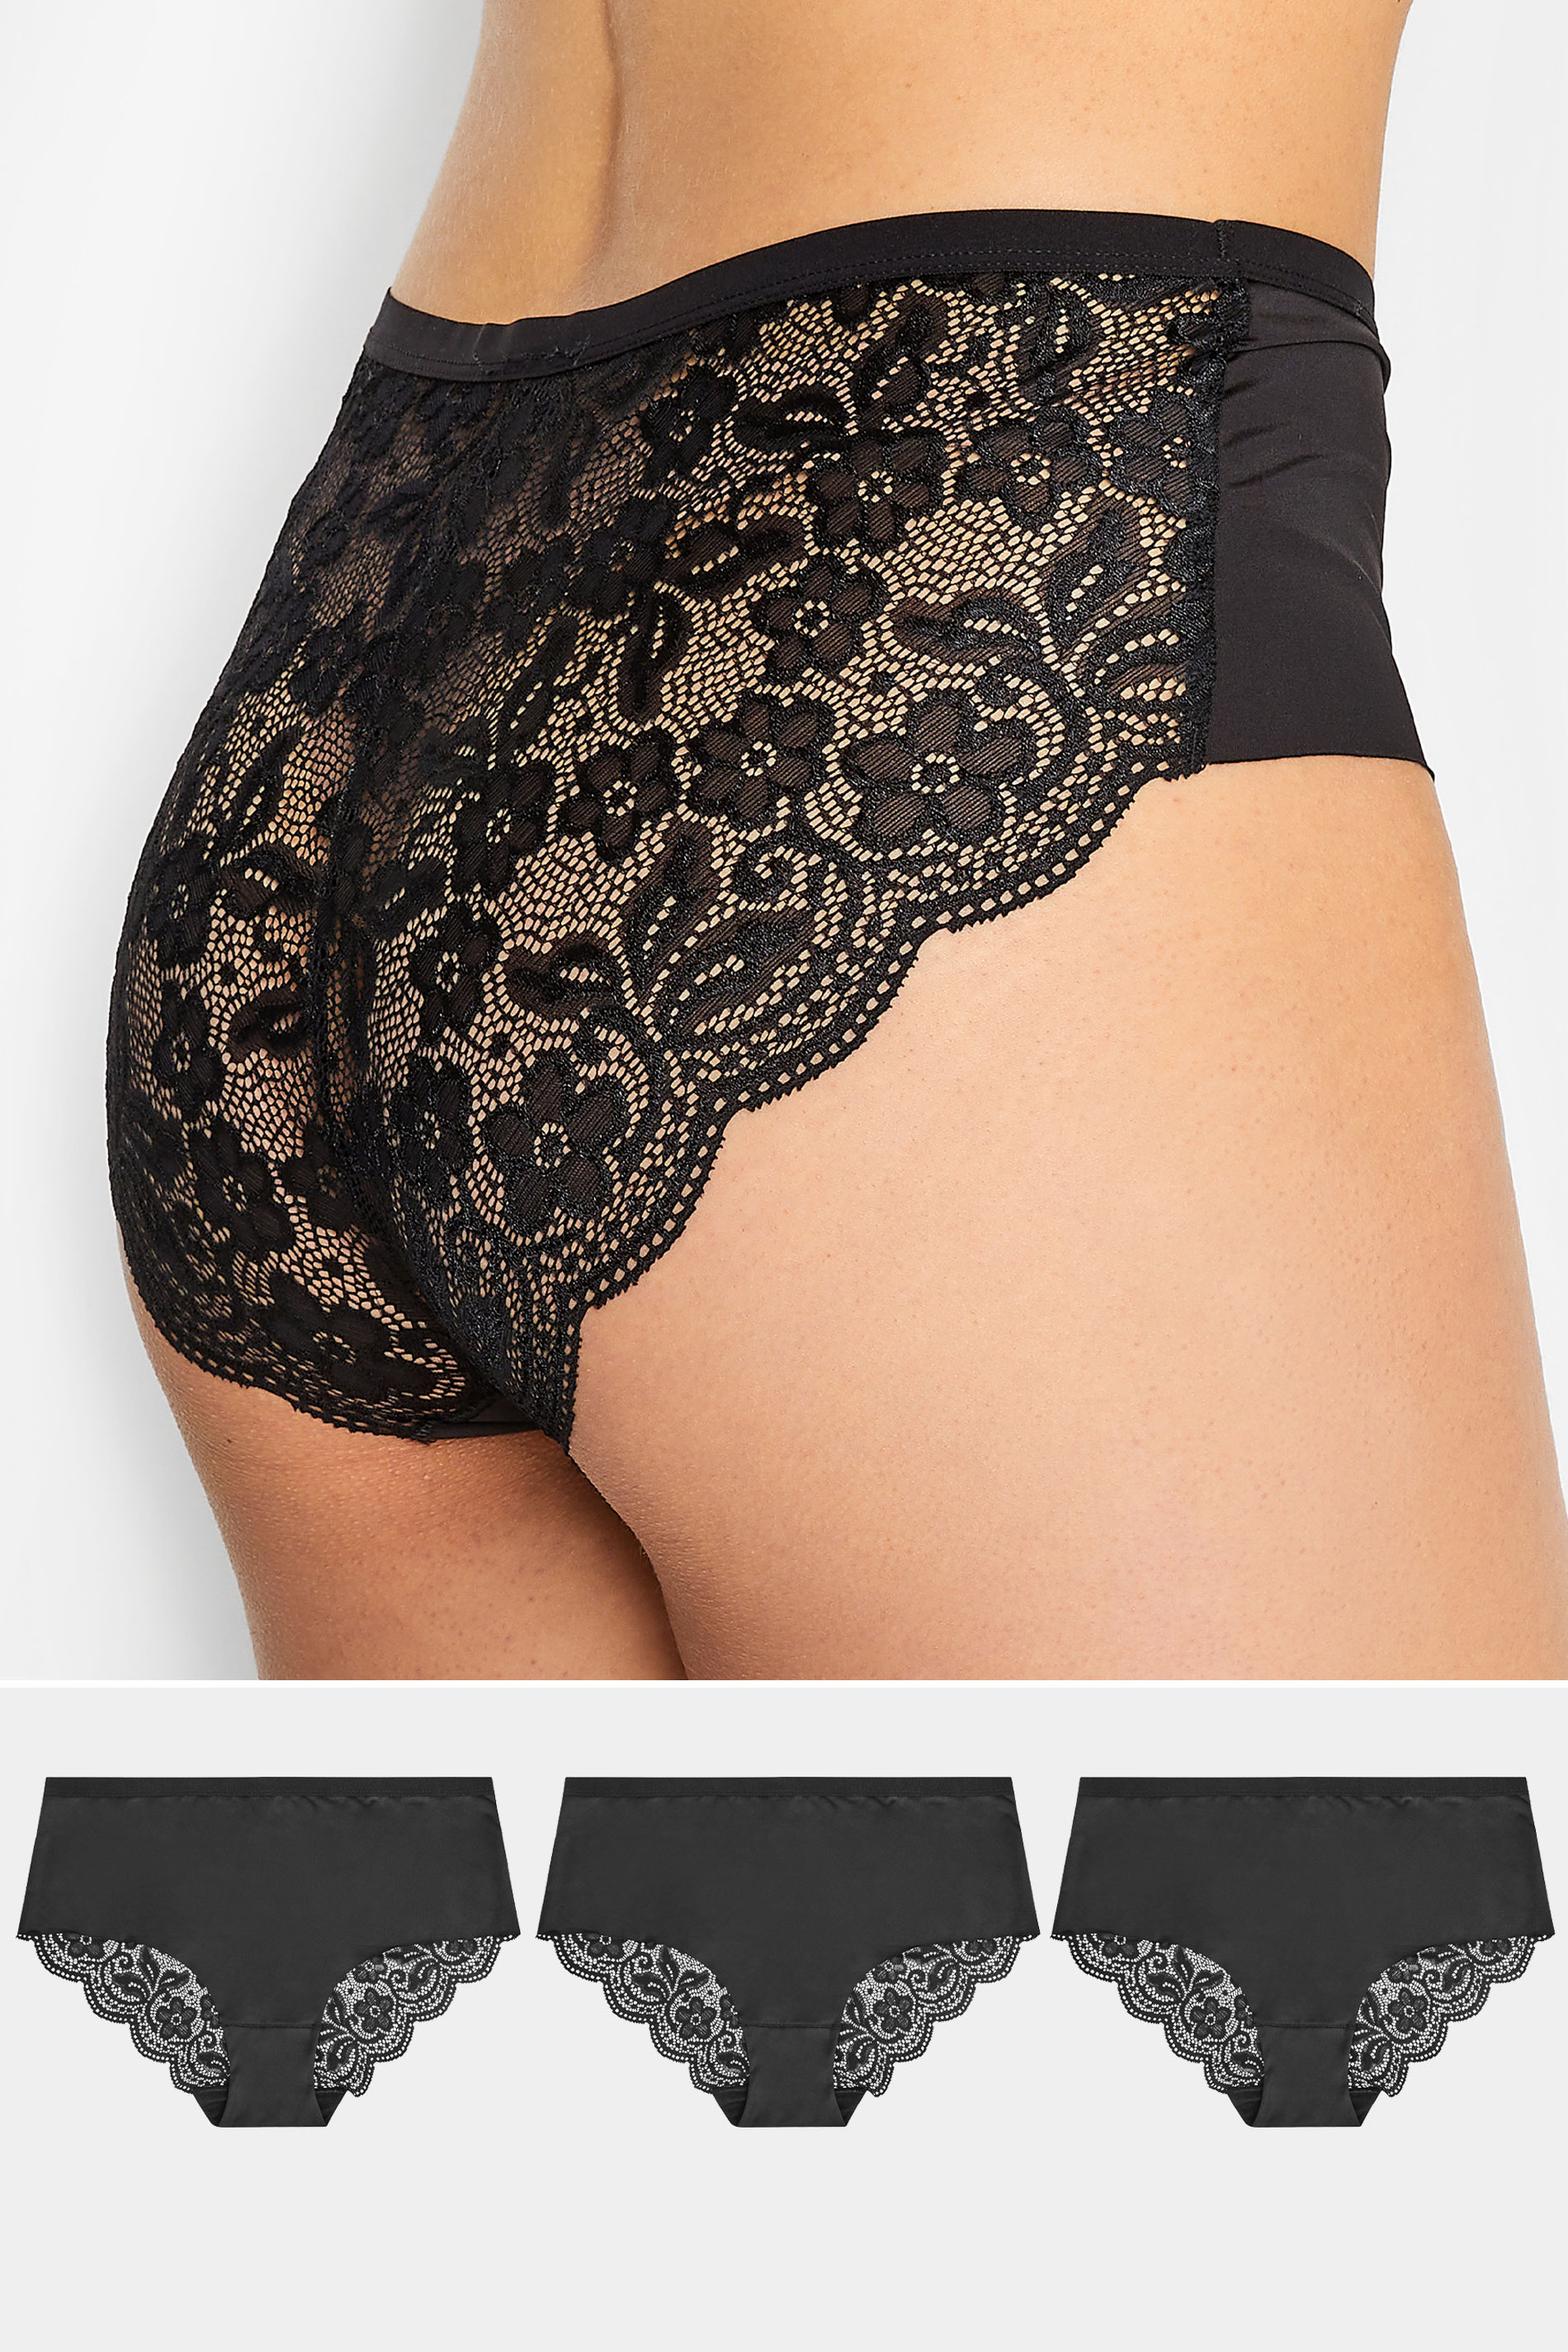 3 PACK Tall Black Lace Back Full Briefs | Long Tall Sally 1